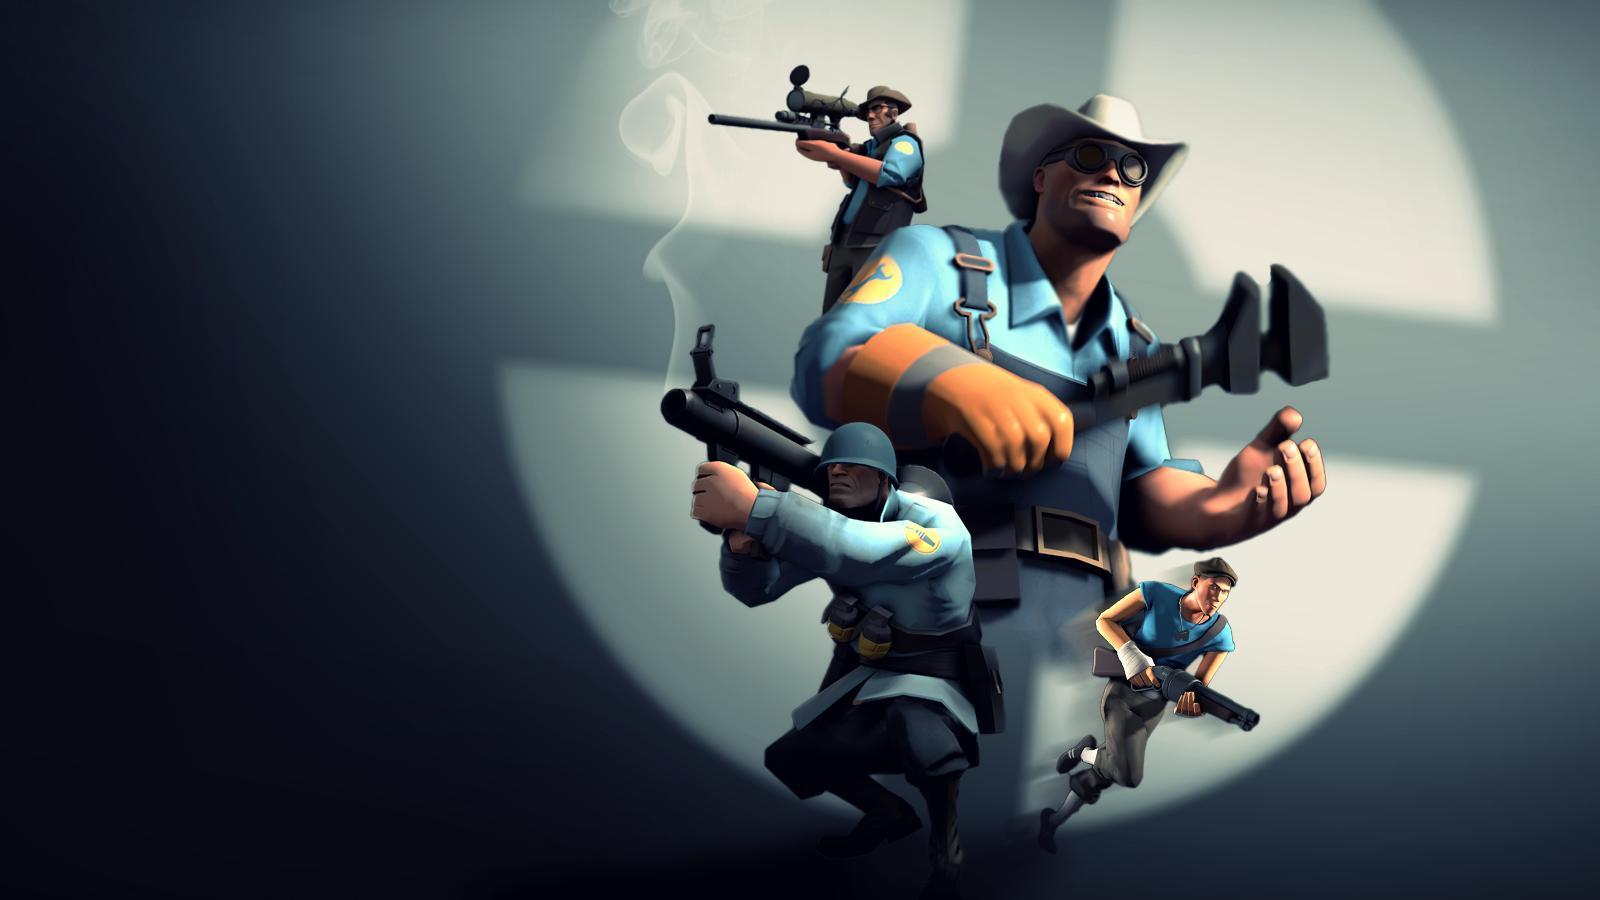 Team Fortress Background